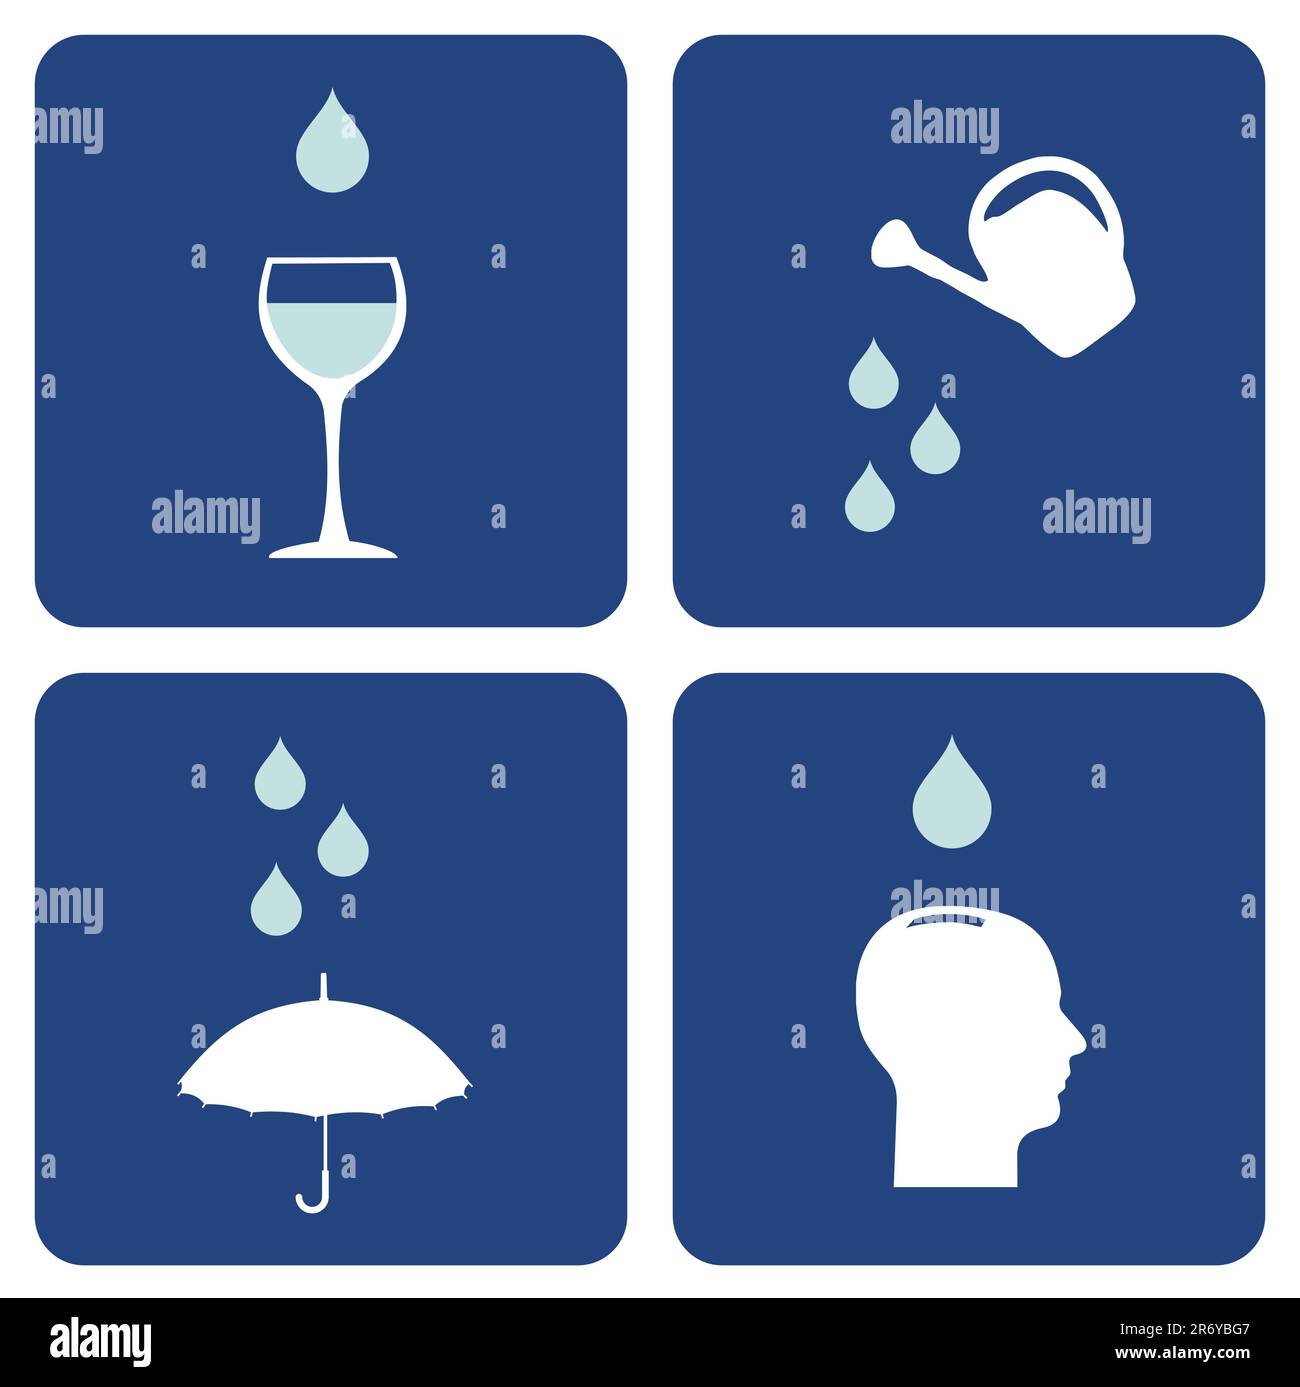 Environment pictograms series: icons composition about water care importance. Stock Vector